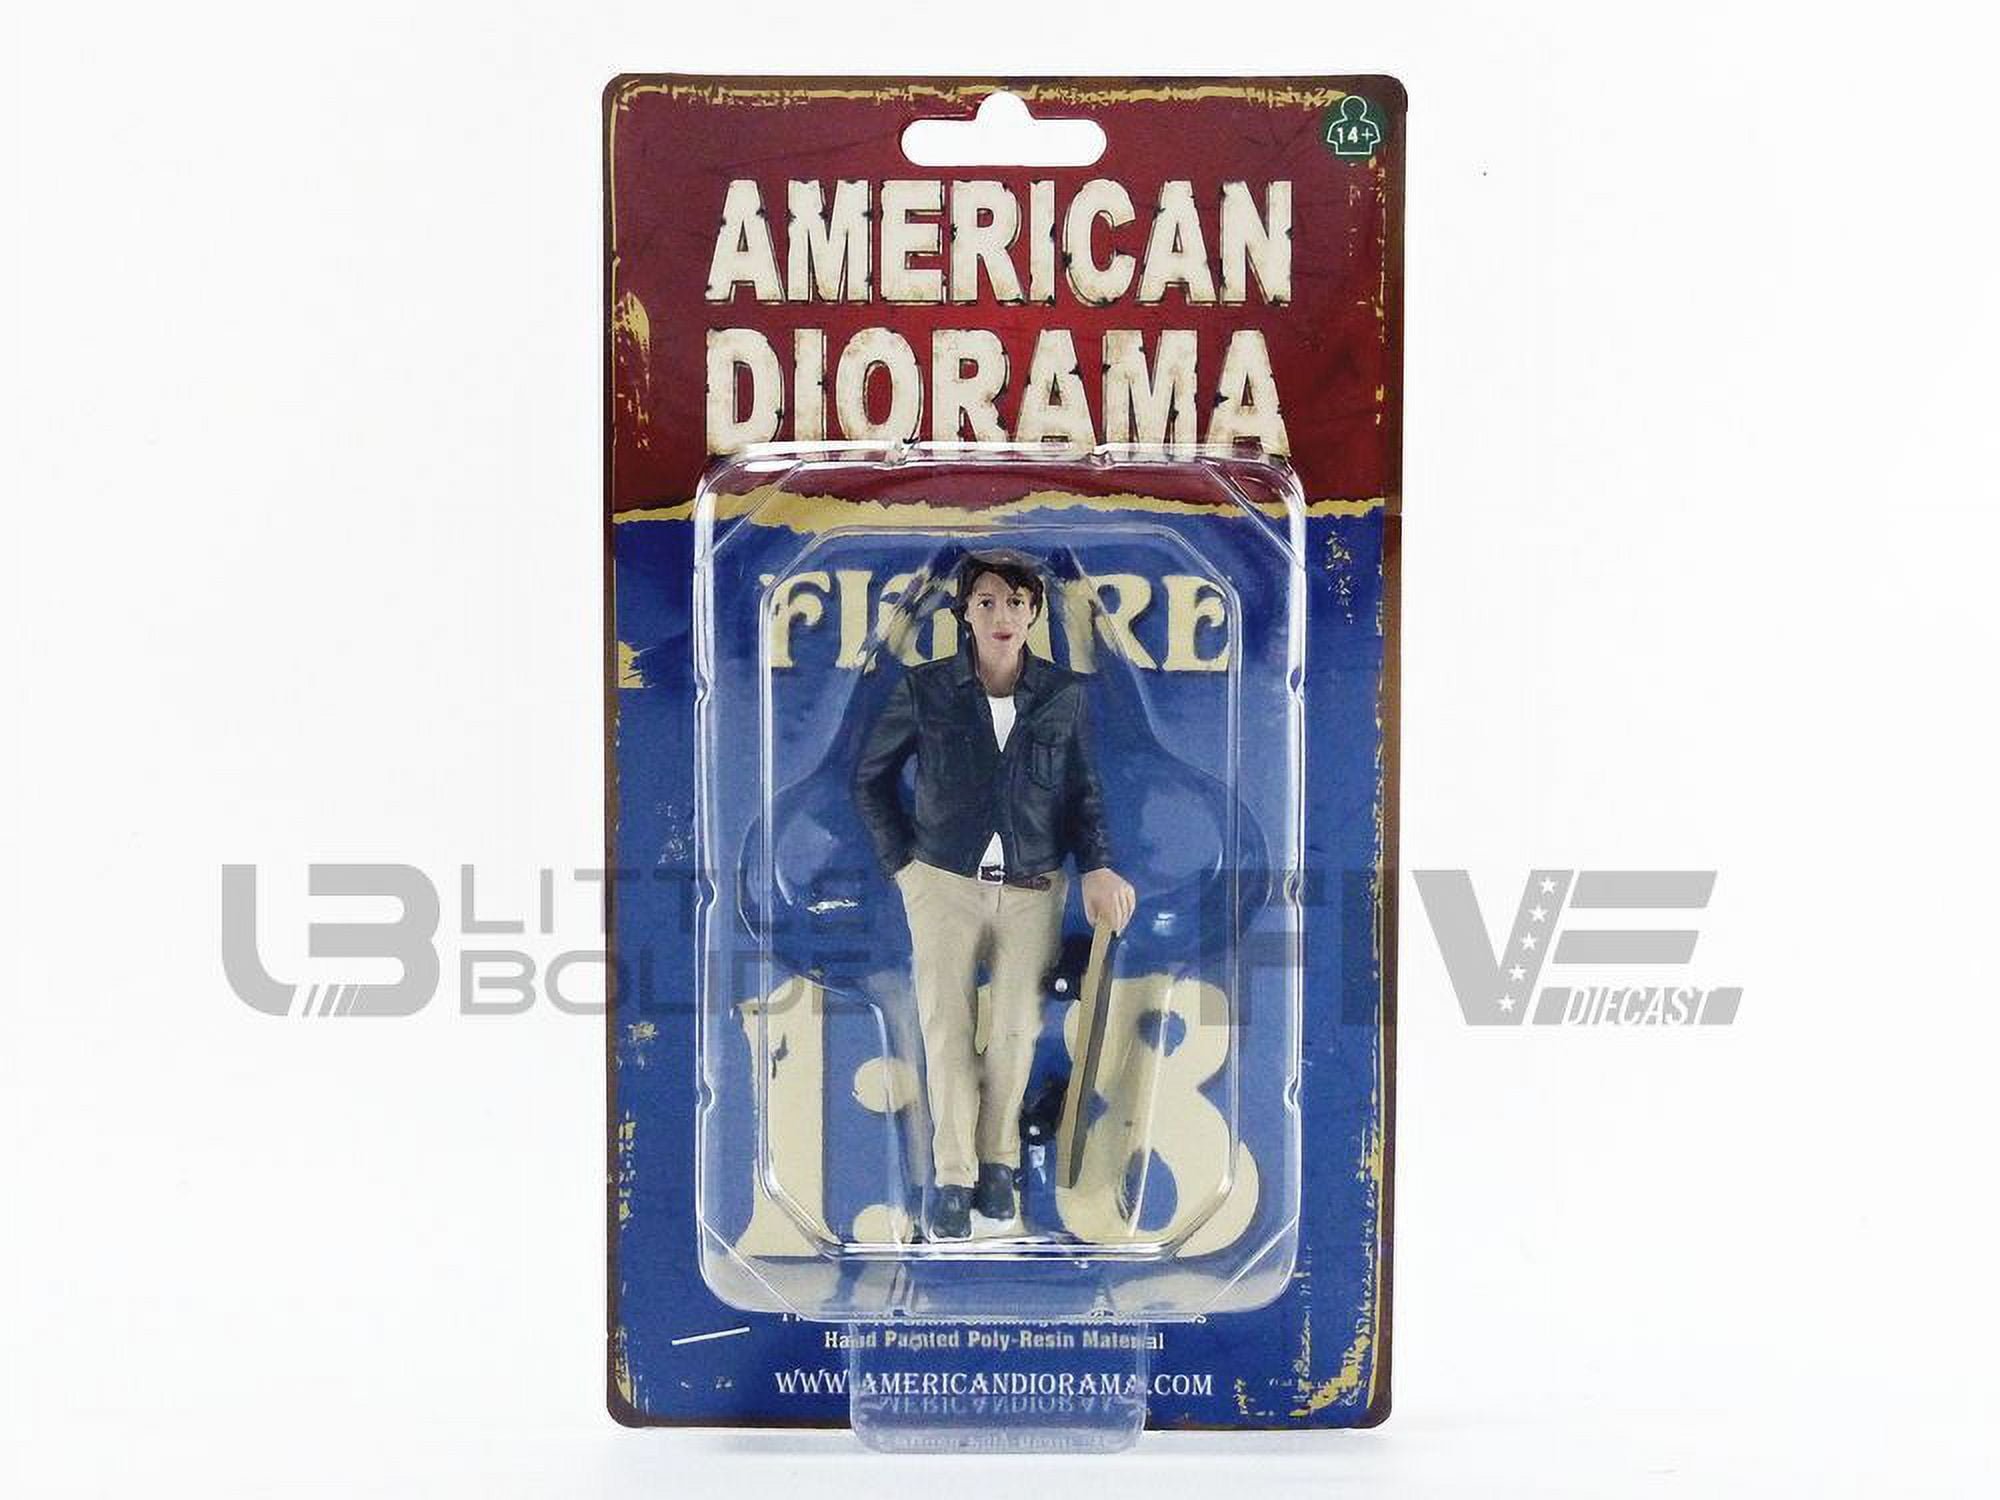 Picture of American Diorama 38242 Skateboarder Figurine III for 1 by 18 Scale Models